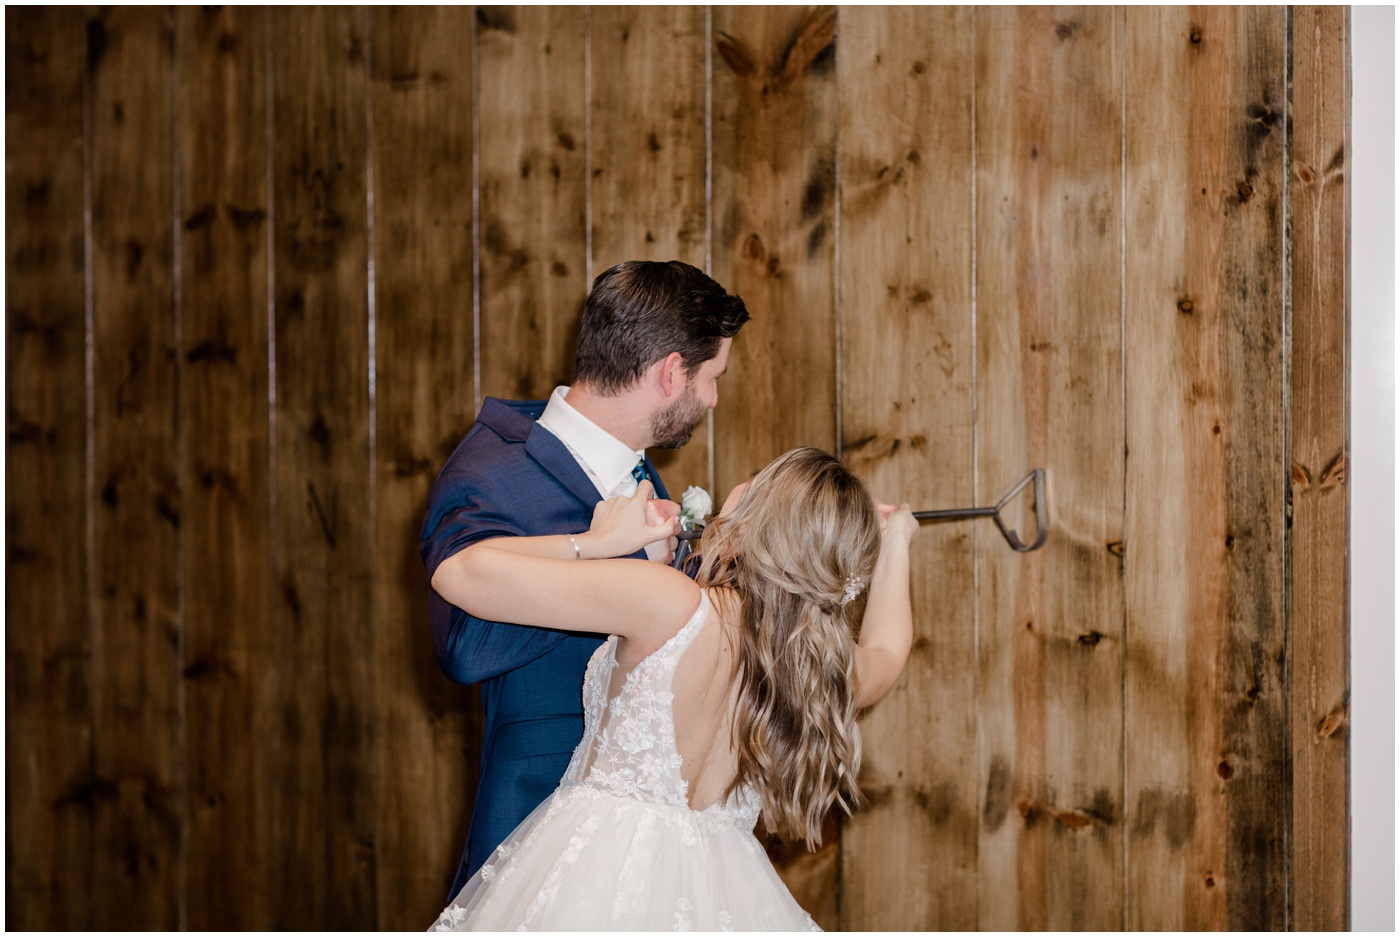 bride and groom brand a wall at their texas wedding venue